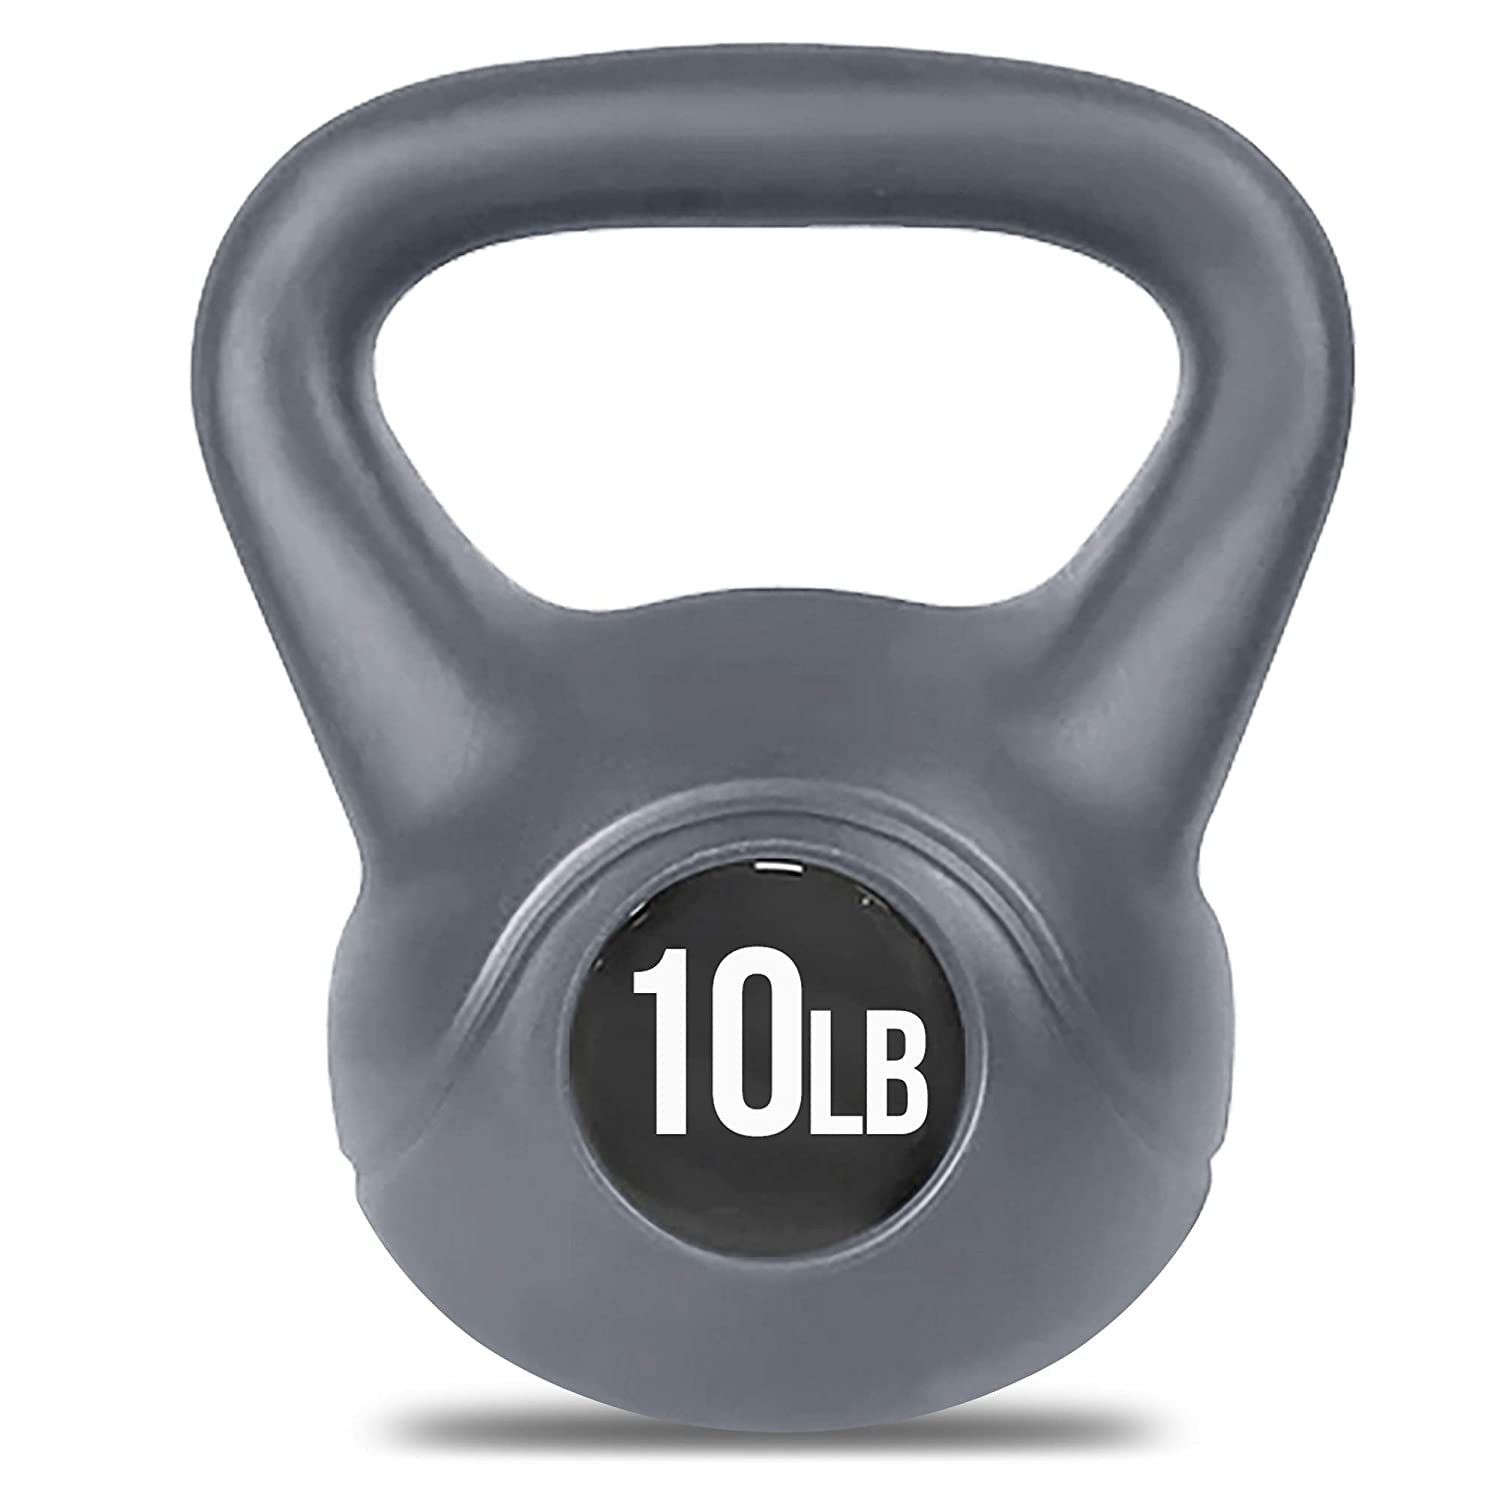 Primary image for Aduro Kettle Bell Weights For Exercises Deluxe Vinyl Coated Kettle Bel